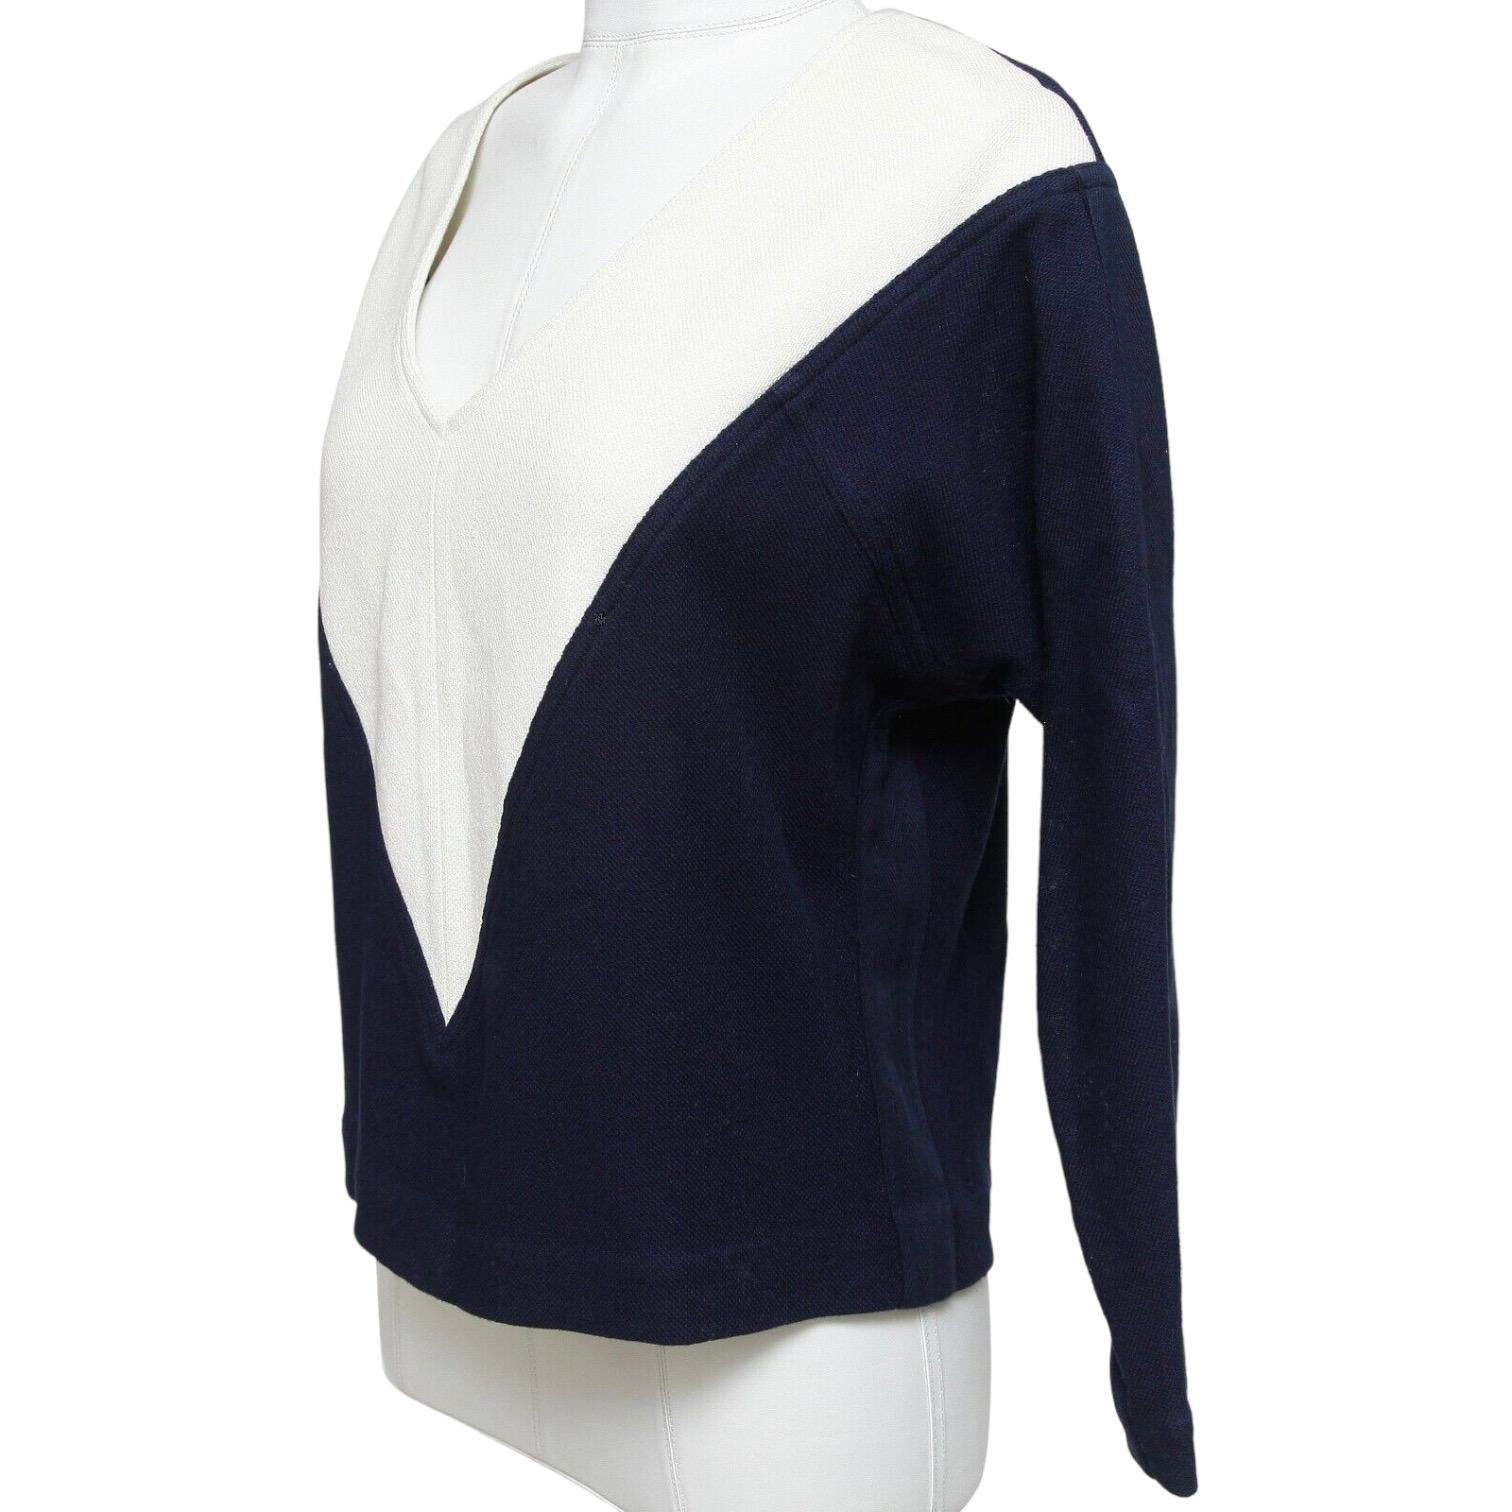 CHLOE Blue Shirt Knit Top Navy Off White V-neck Long Sleeve Cotton Sz S In Good Condition For Sale In Hollywood, FL